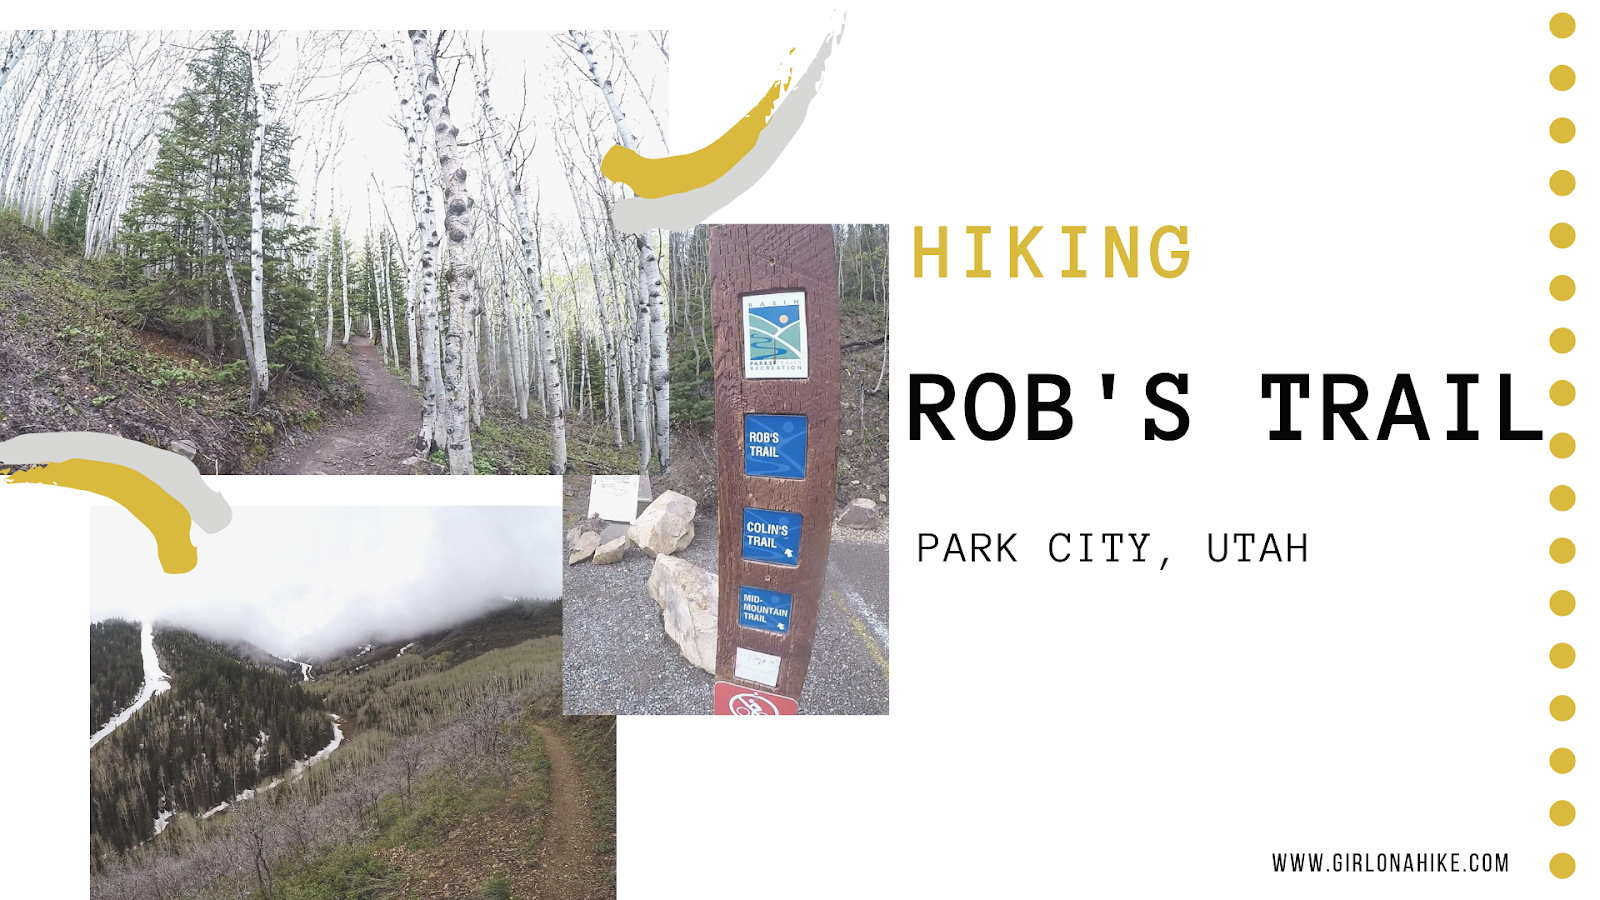 Hiking Rob's Trail, Hiking in Park City, Utah, Hiking in Utah with Dogs